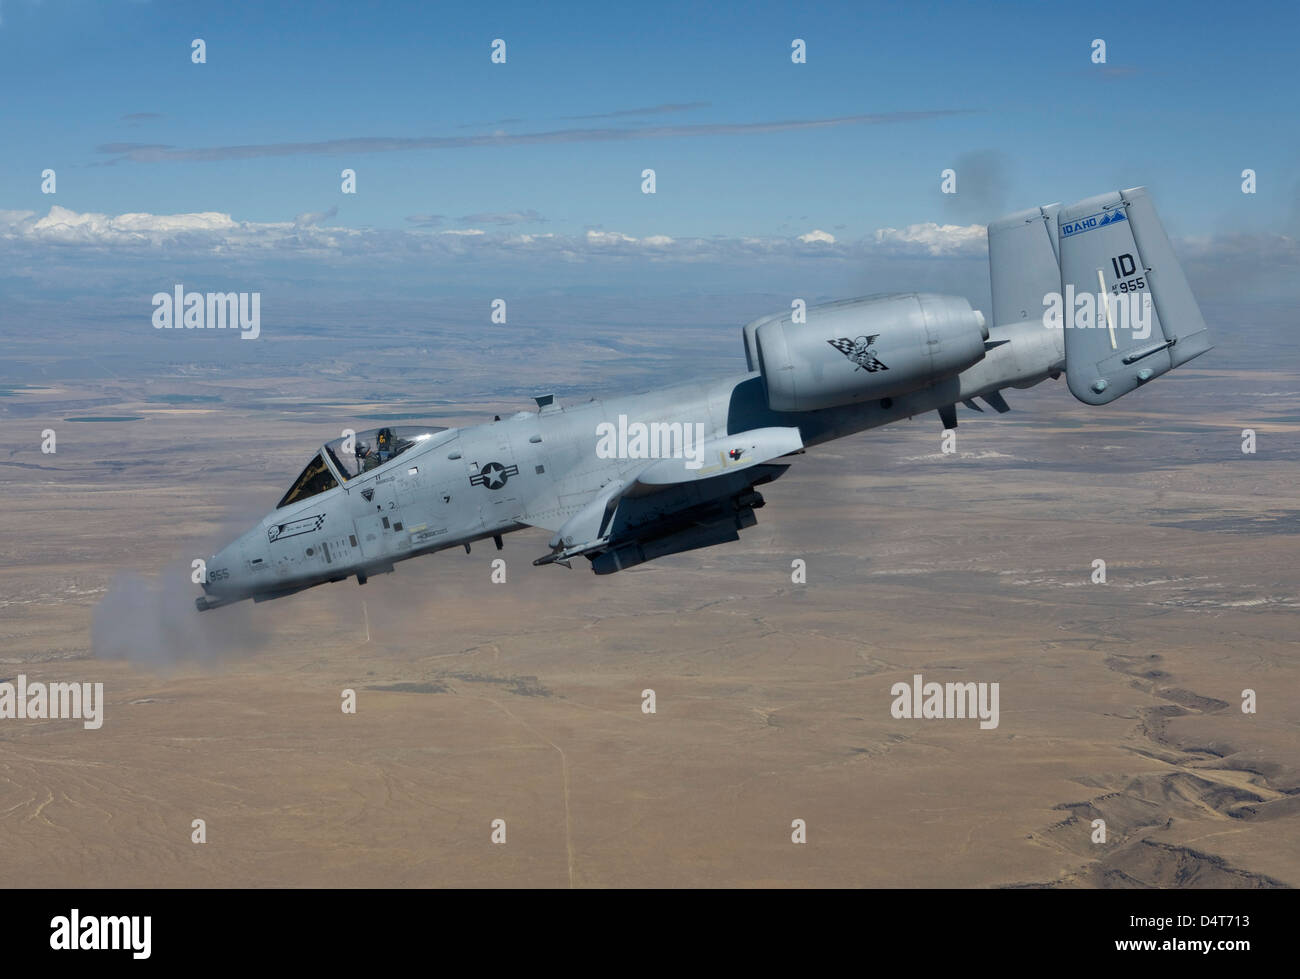 An A-10C Thunderbolt from the 190th Fighter Squadron fires its 30mm cannon during a training mission out of Boise, Idaho. Stock Photo